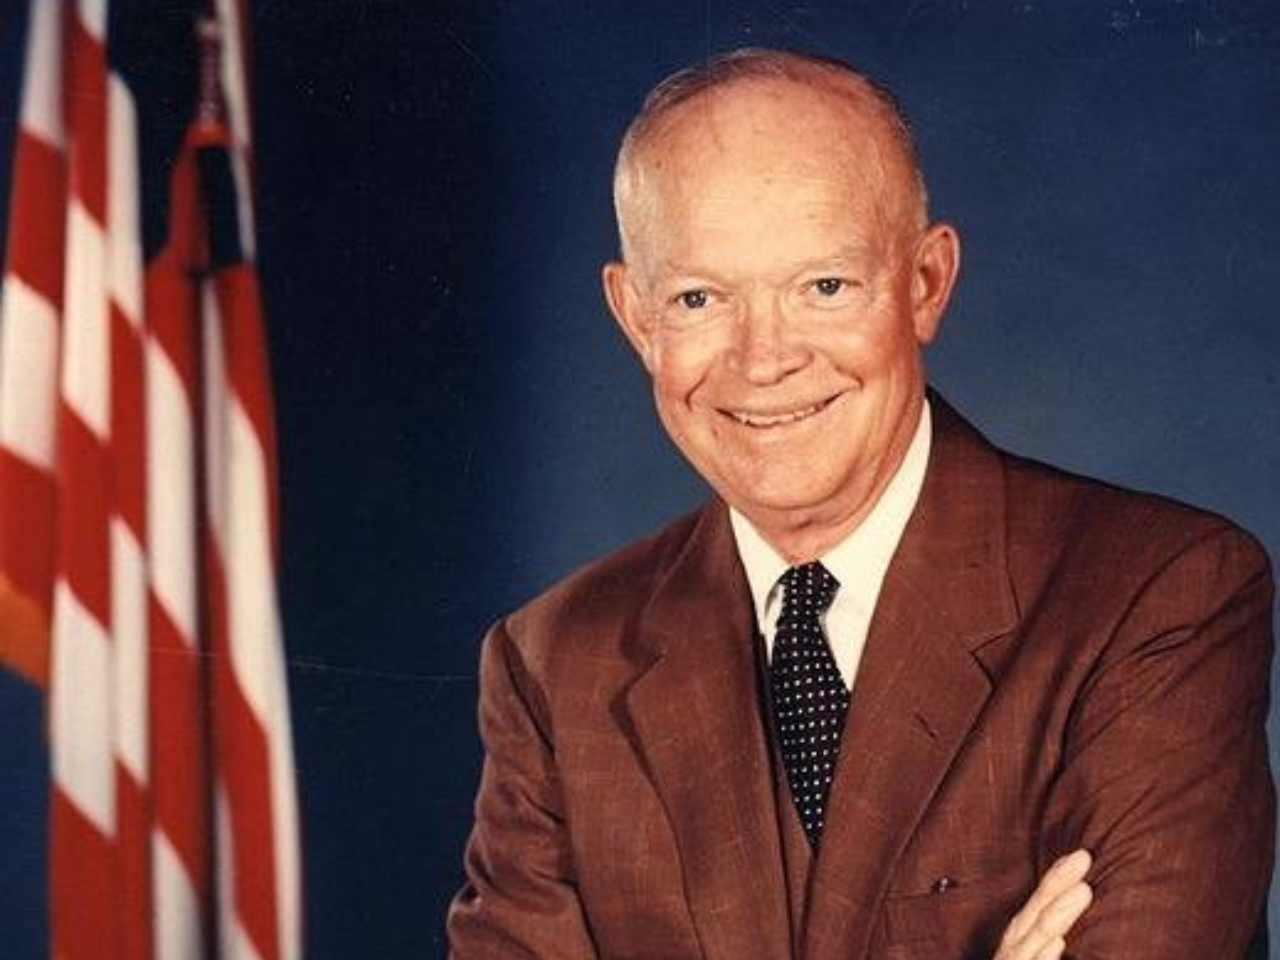 Dwight Eisenhower, America's 34th president. Smiling in the picture with folded arms, with the American flag in the background.